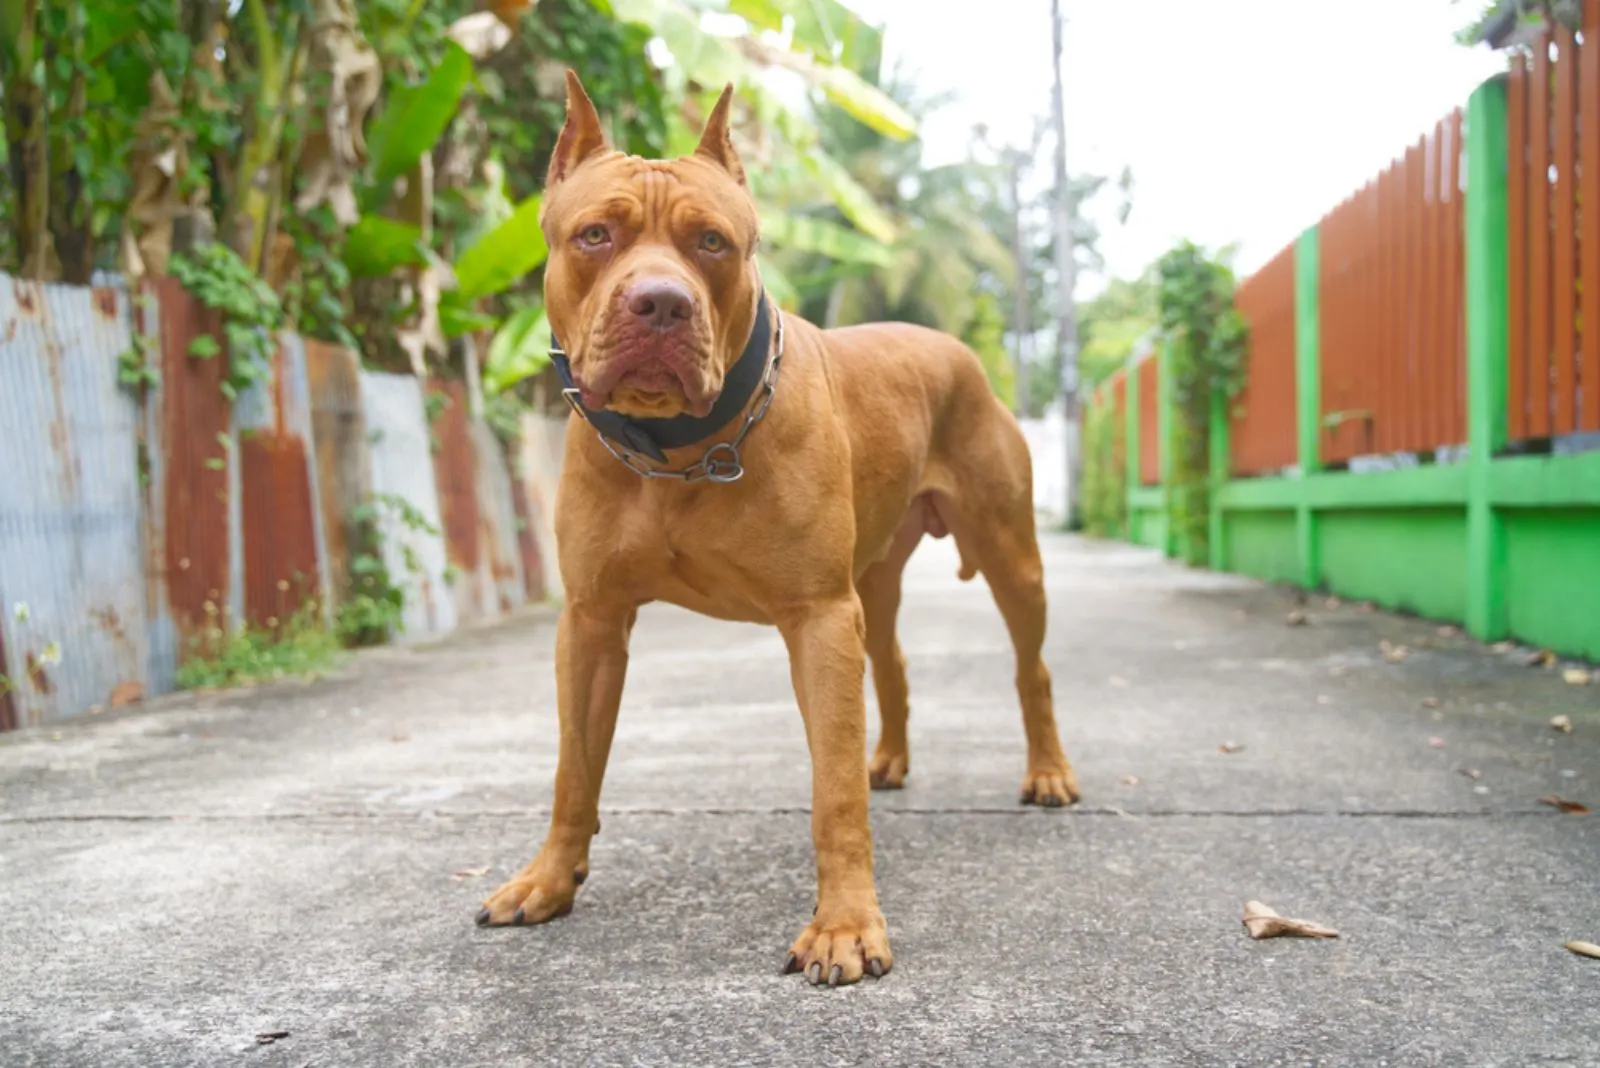 A pitbull is standing on the pavement